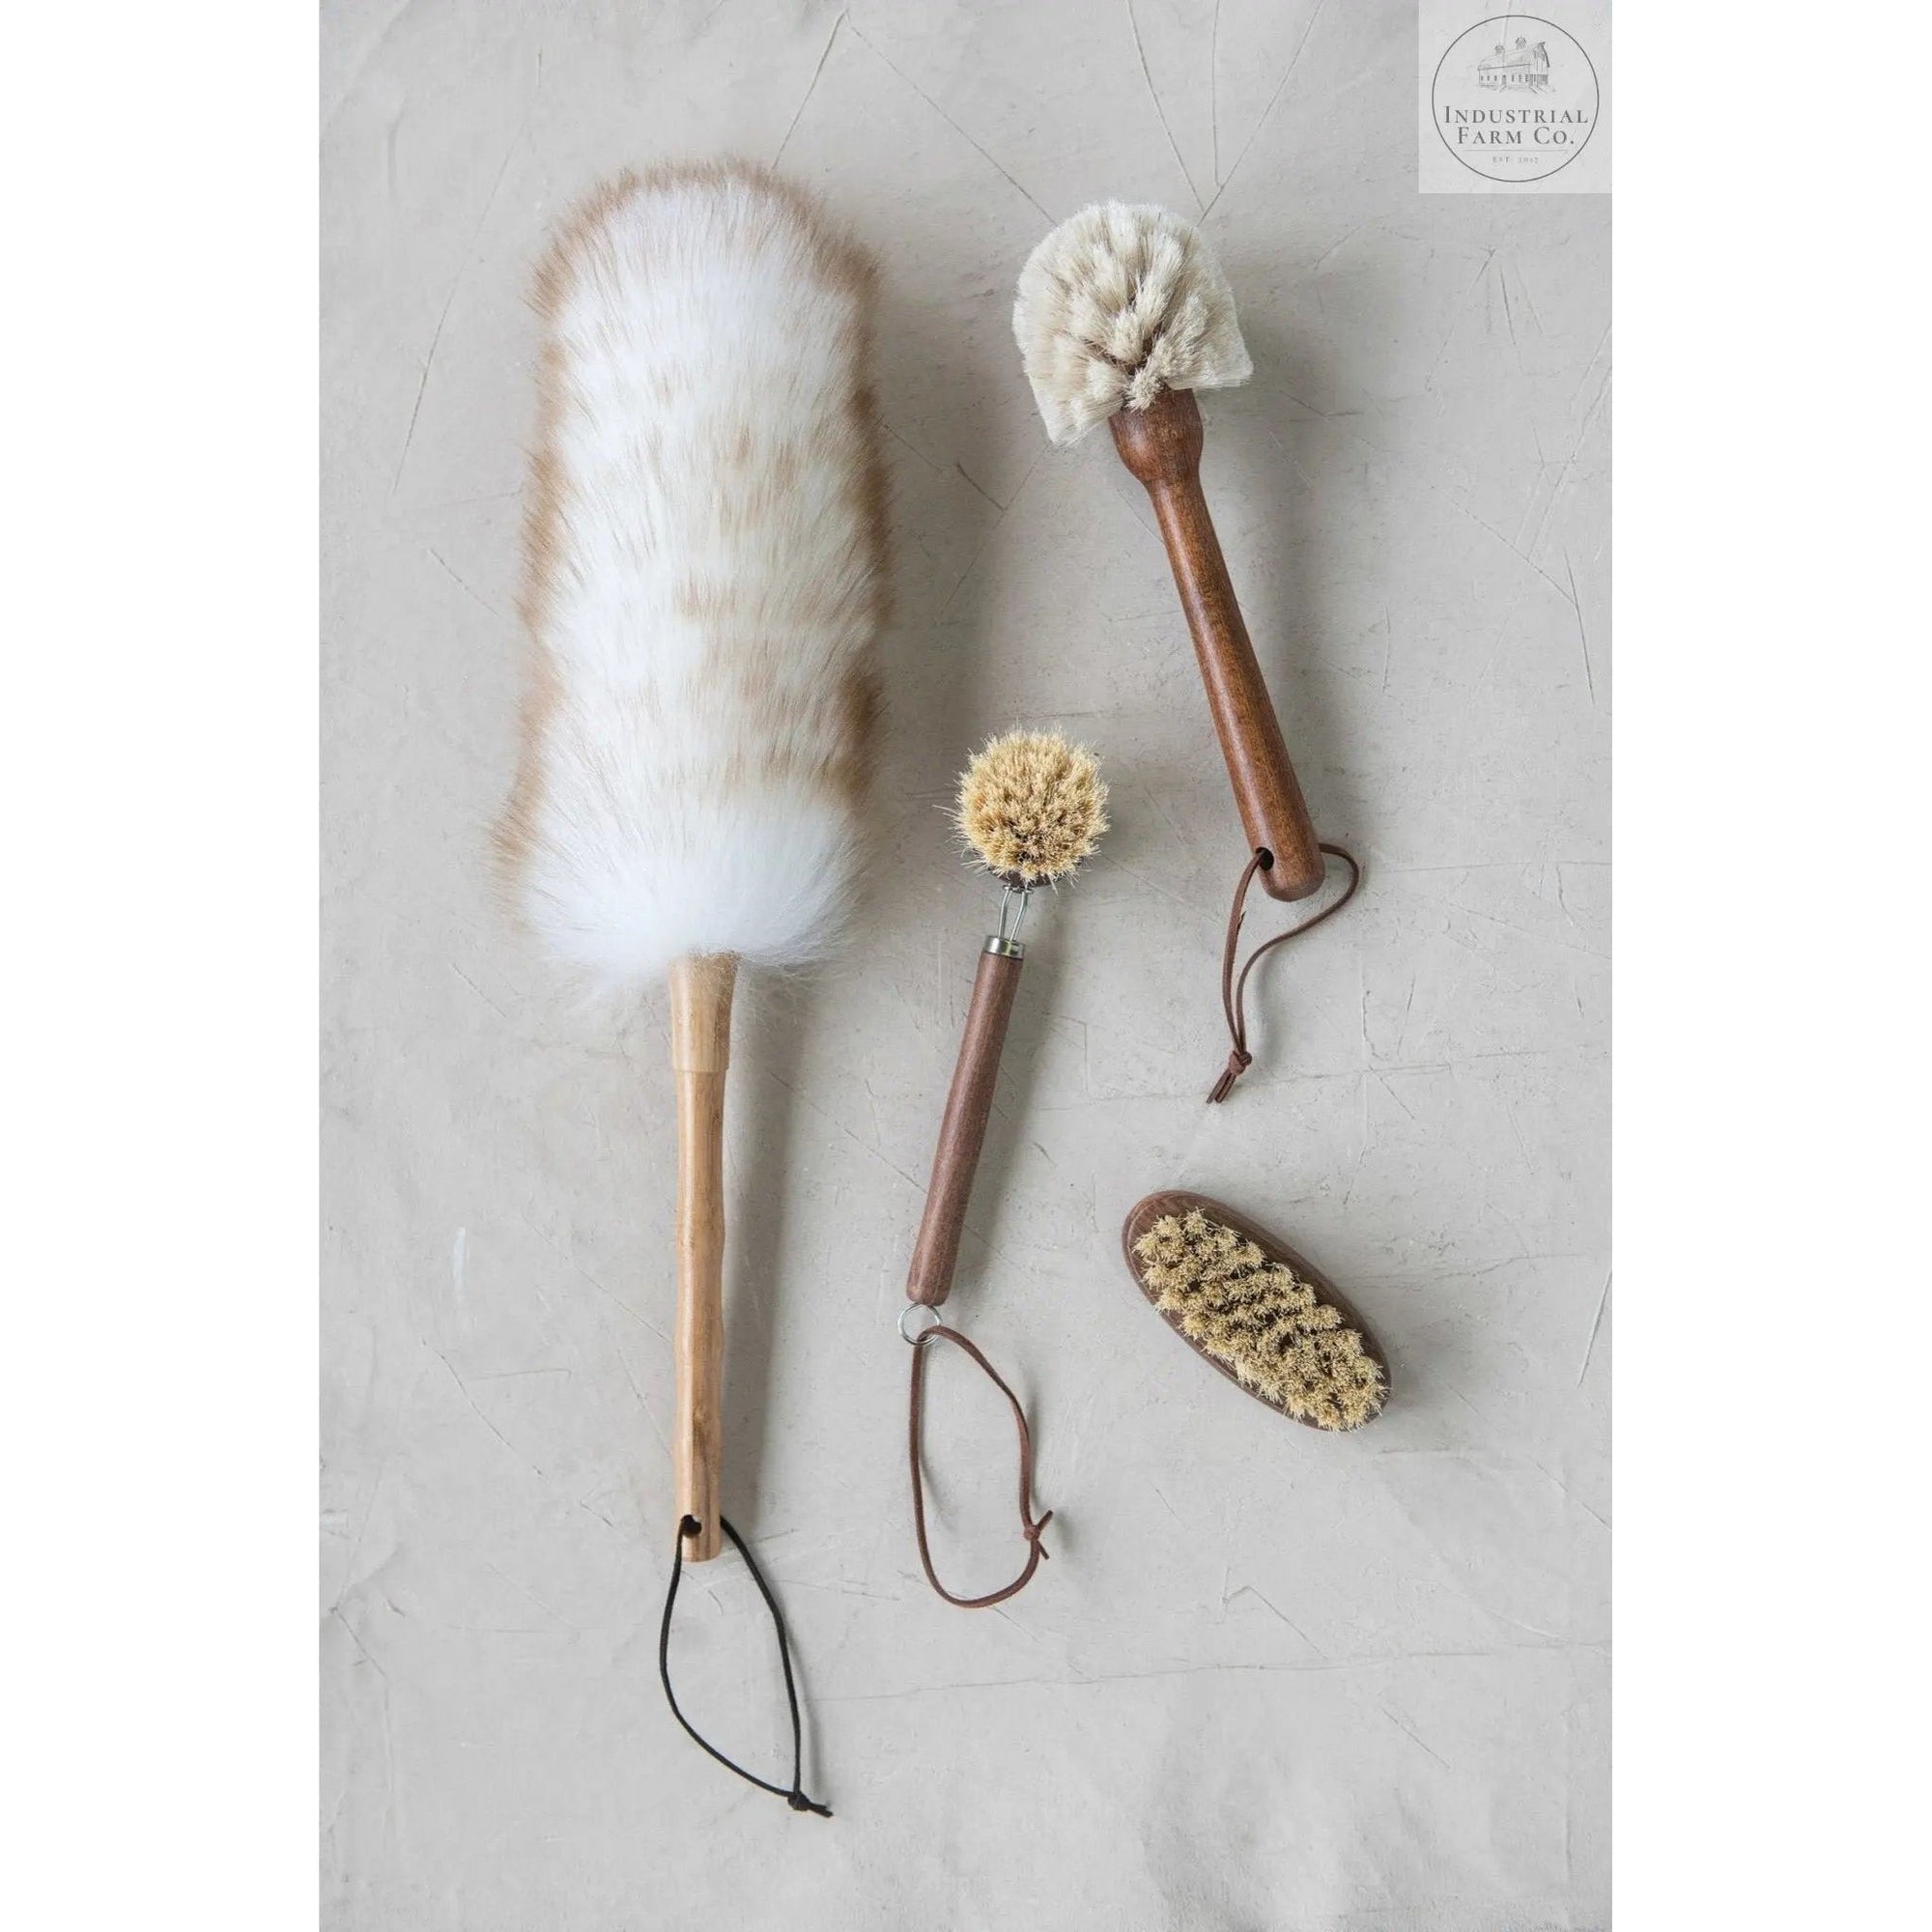 Beech Wood and Tampico Brush     | Industrial Farm Co